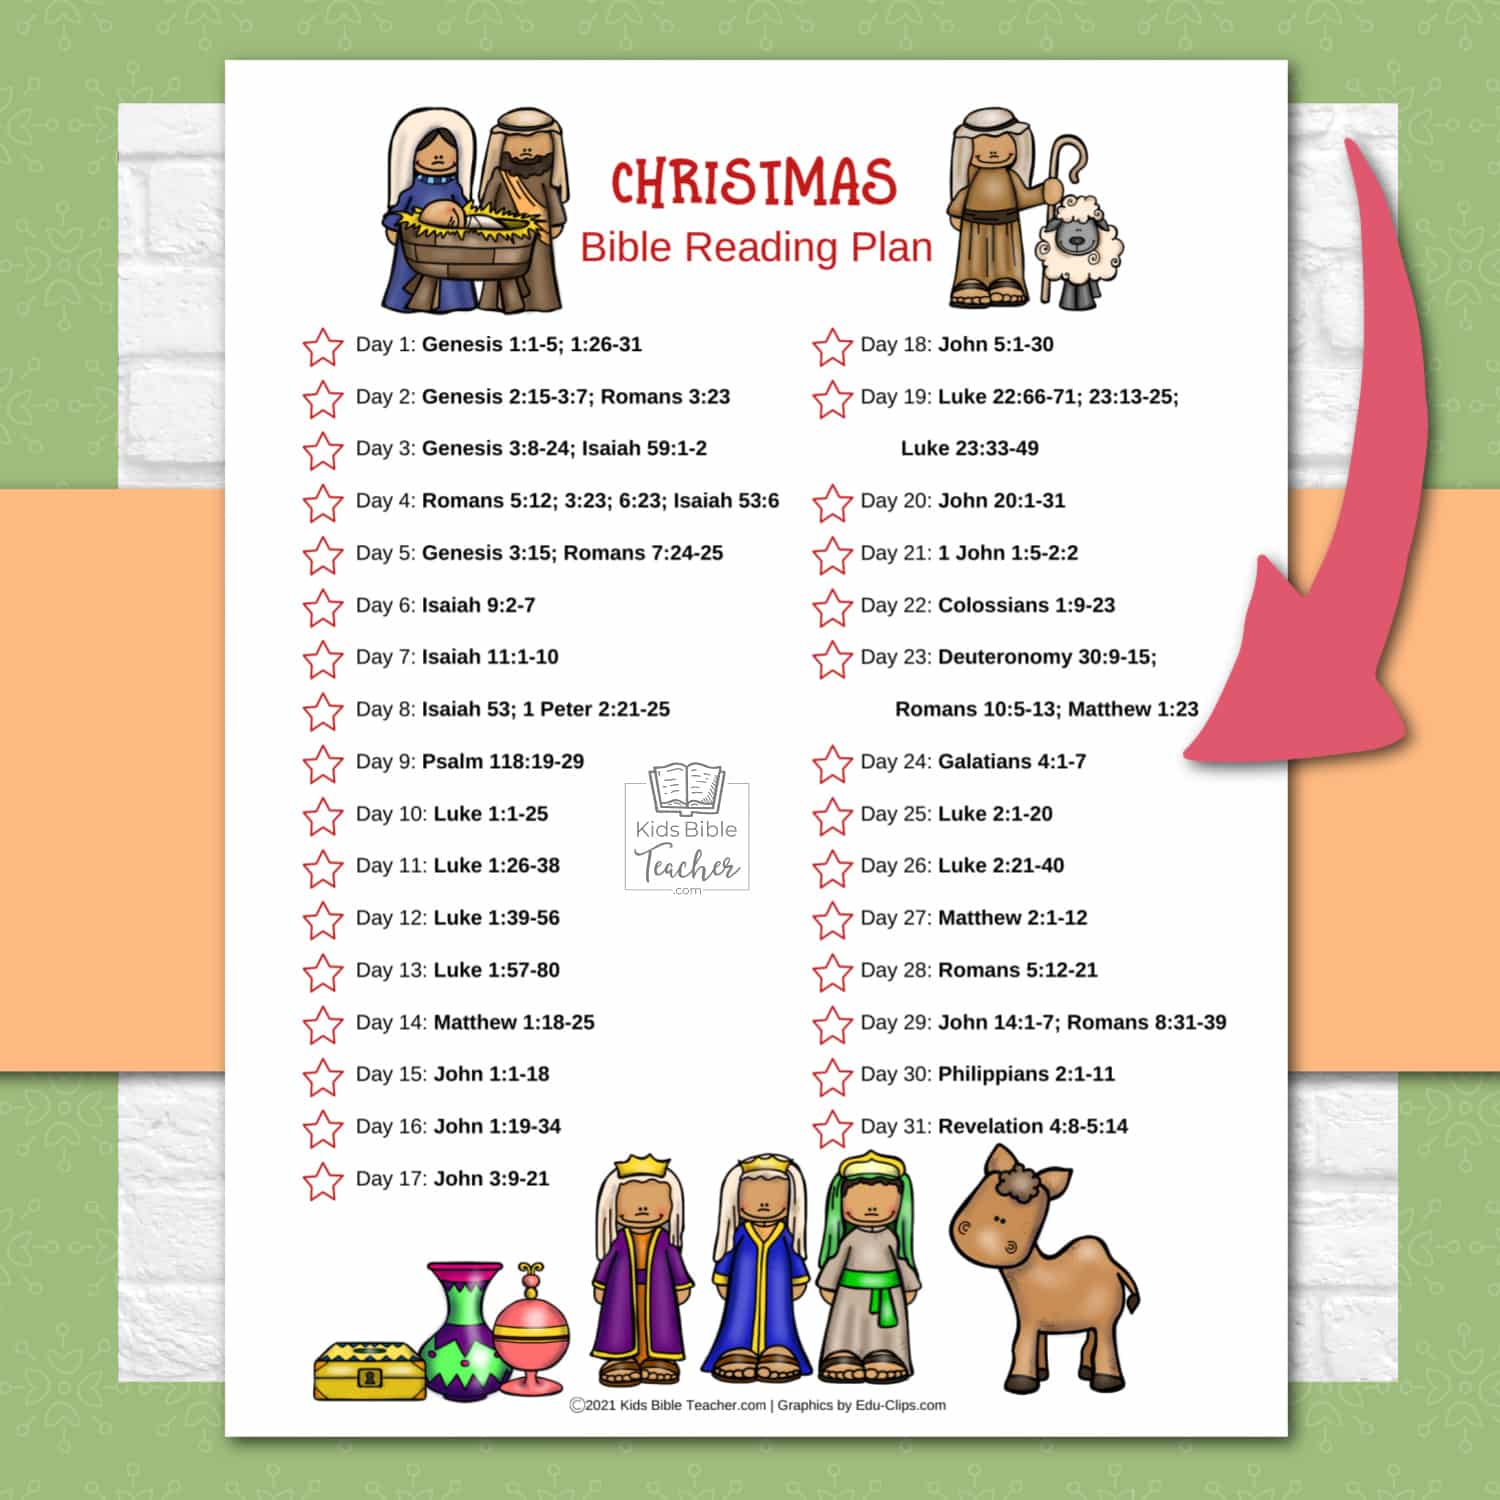 Help your kids discover God's beautiful plan of salvation this Christmas with this FREE Printable Christmas Bible Reading Plan - perfect for the month of December!